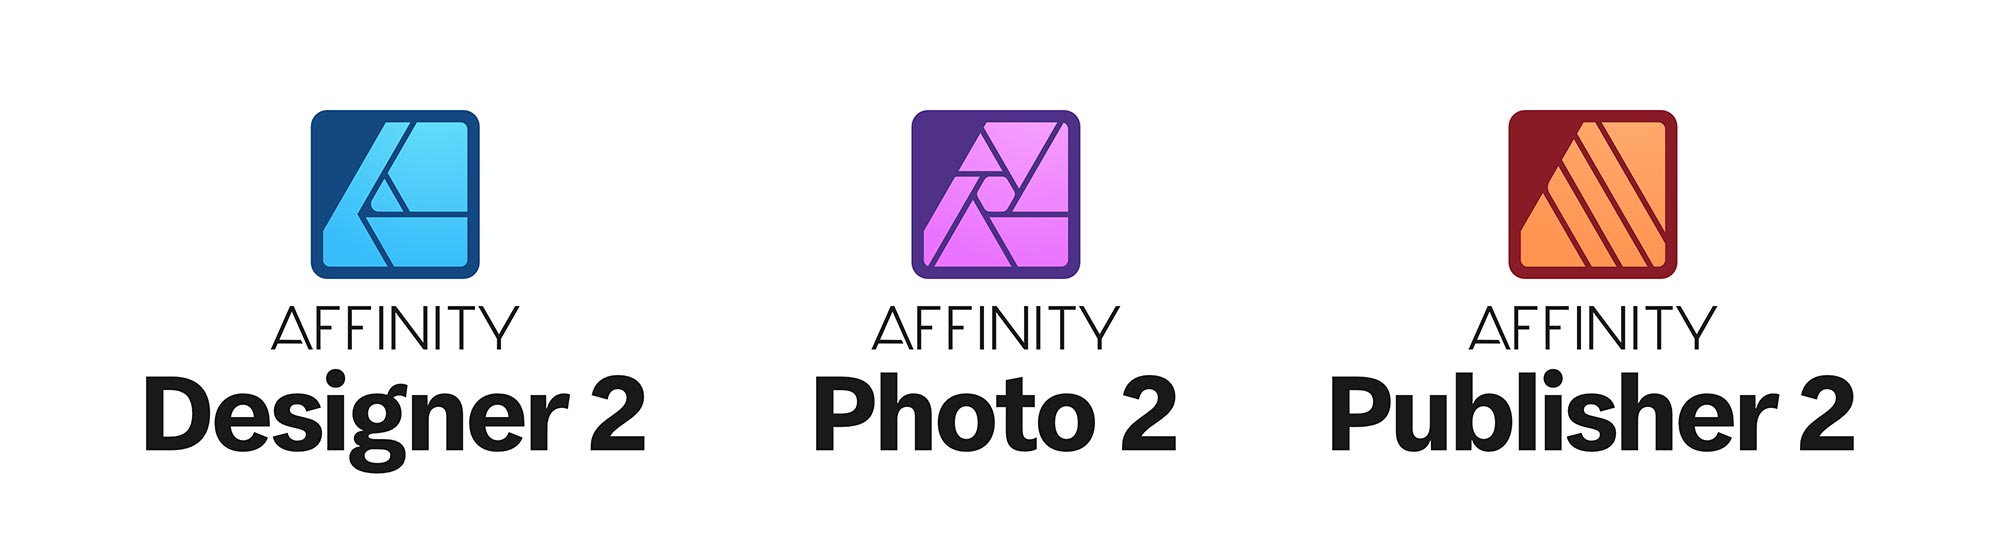 Affinity 2.1: creative suite introduces hundreds of improvements